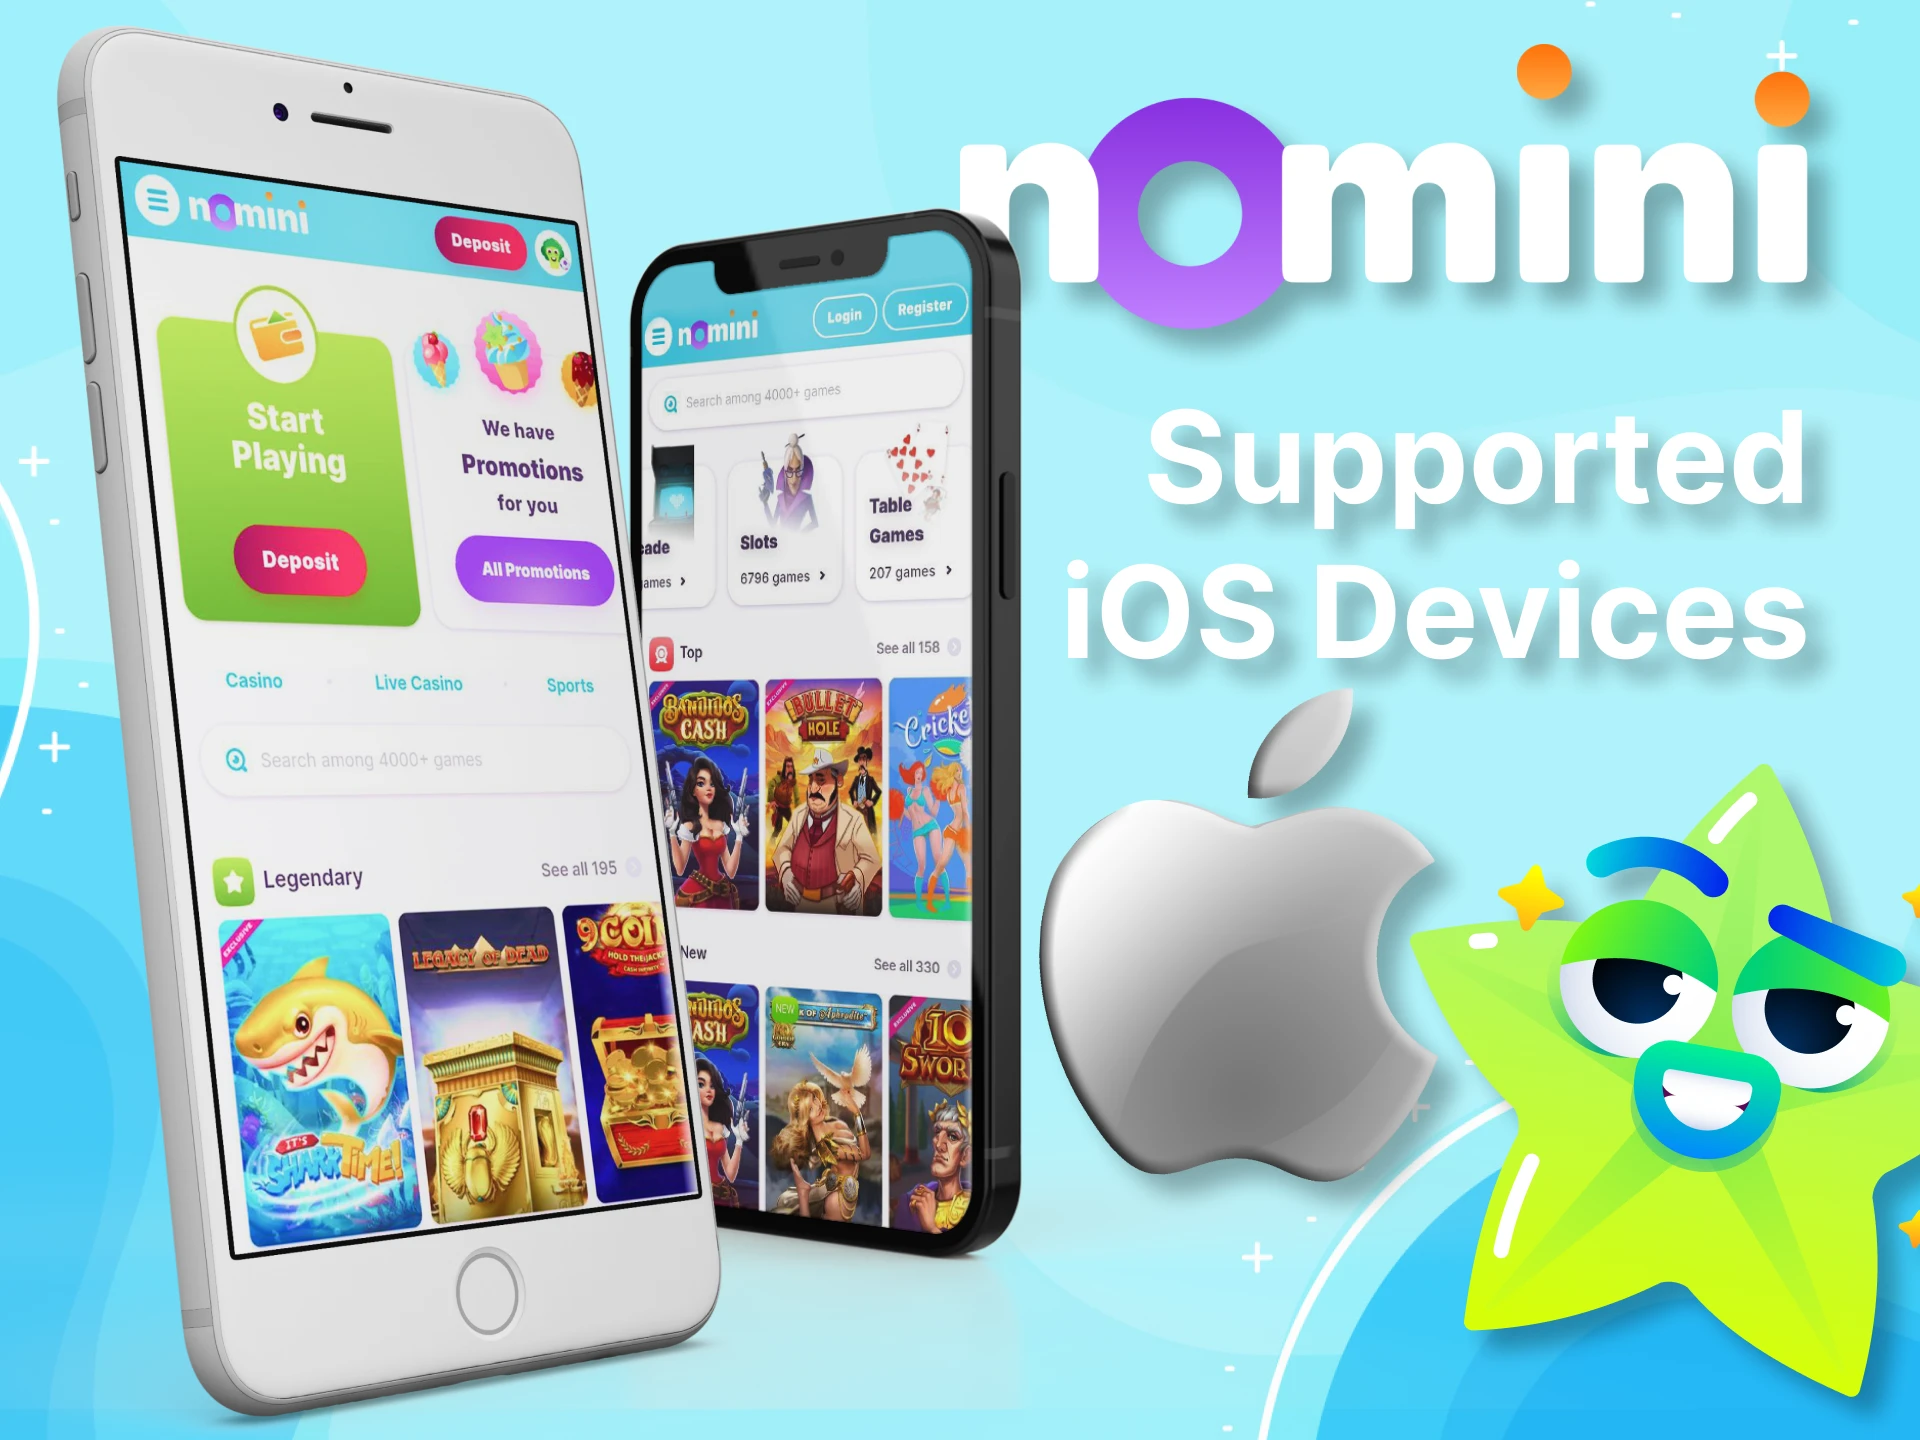 The Nomini app is supported on most iOS devices.